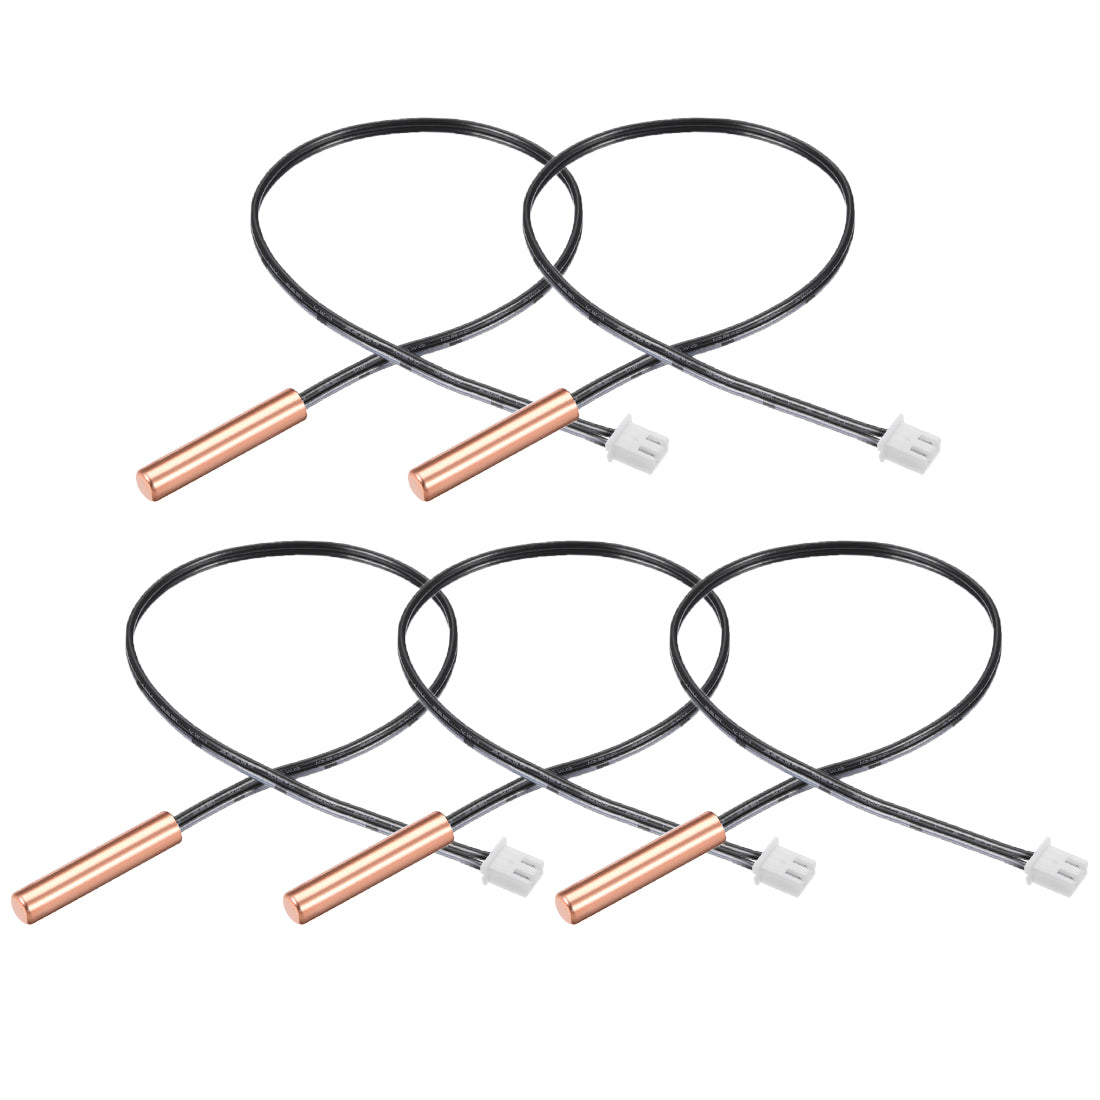 uxcell Uxcell 5 Pcs 10K NTC Thermistor Probe 15.7 Inch Sensitive Temperature Sensor Kit for Air Conditioner